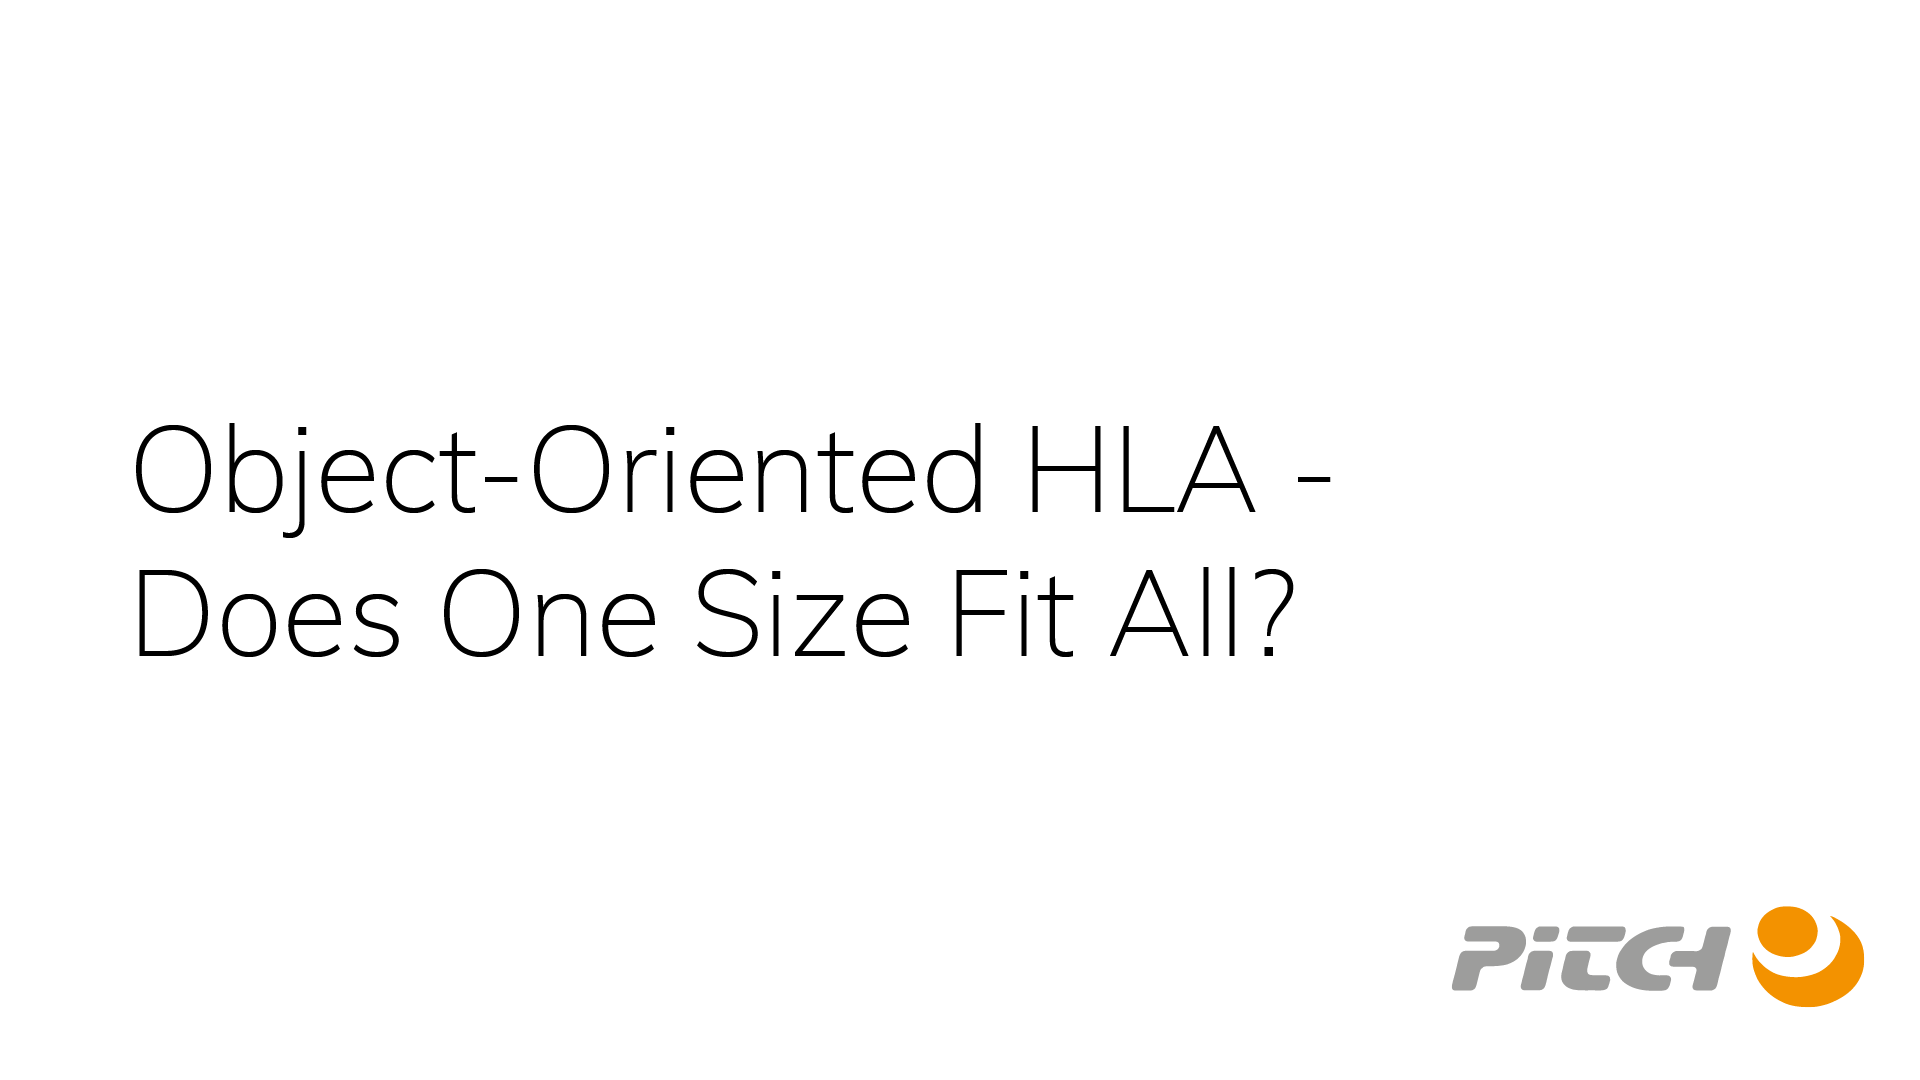 Does One Size Fit All?